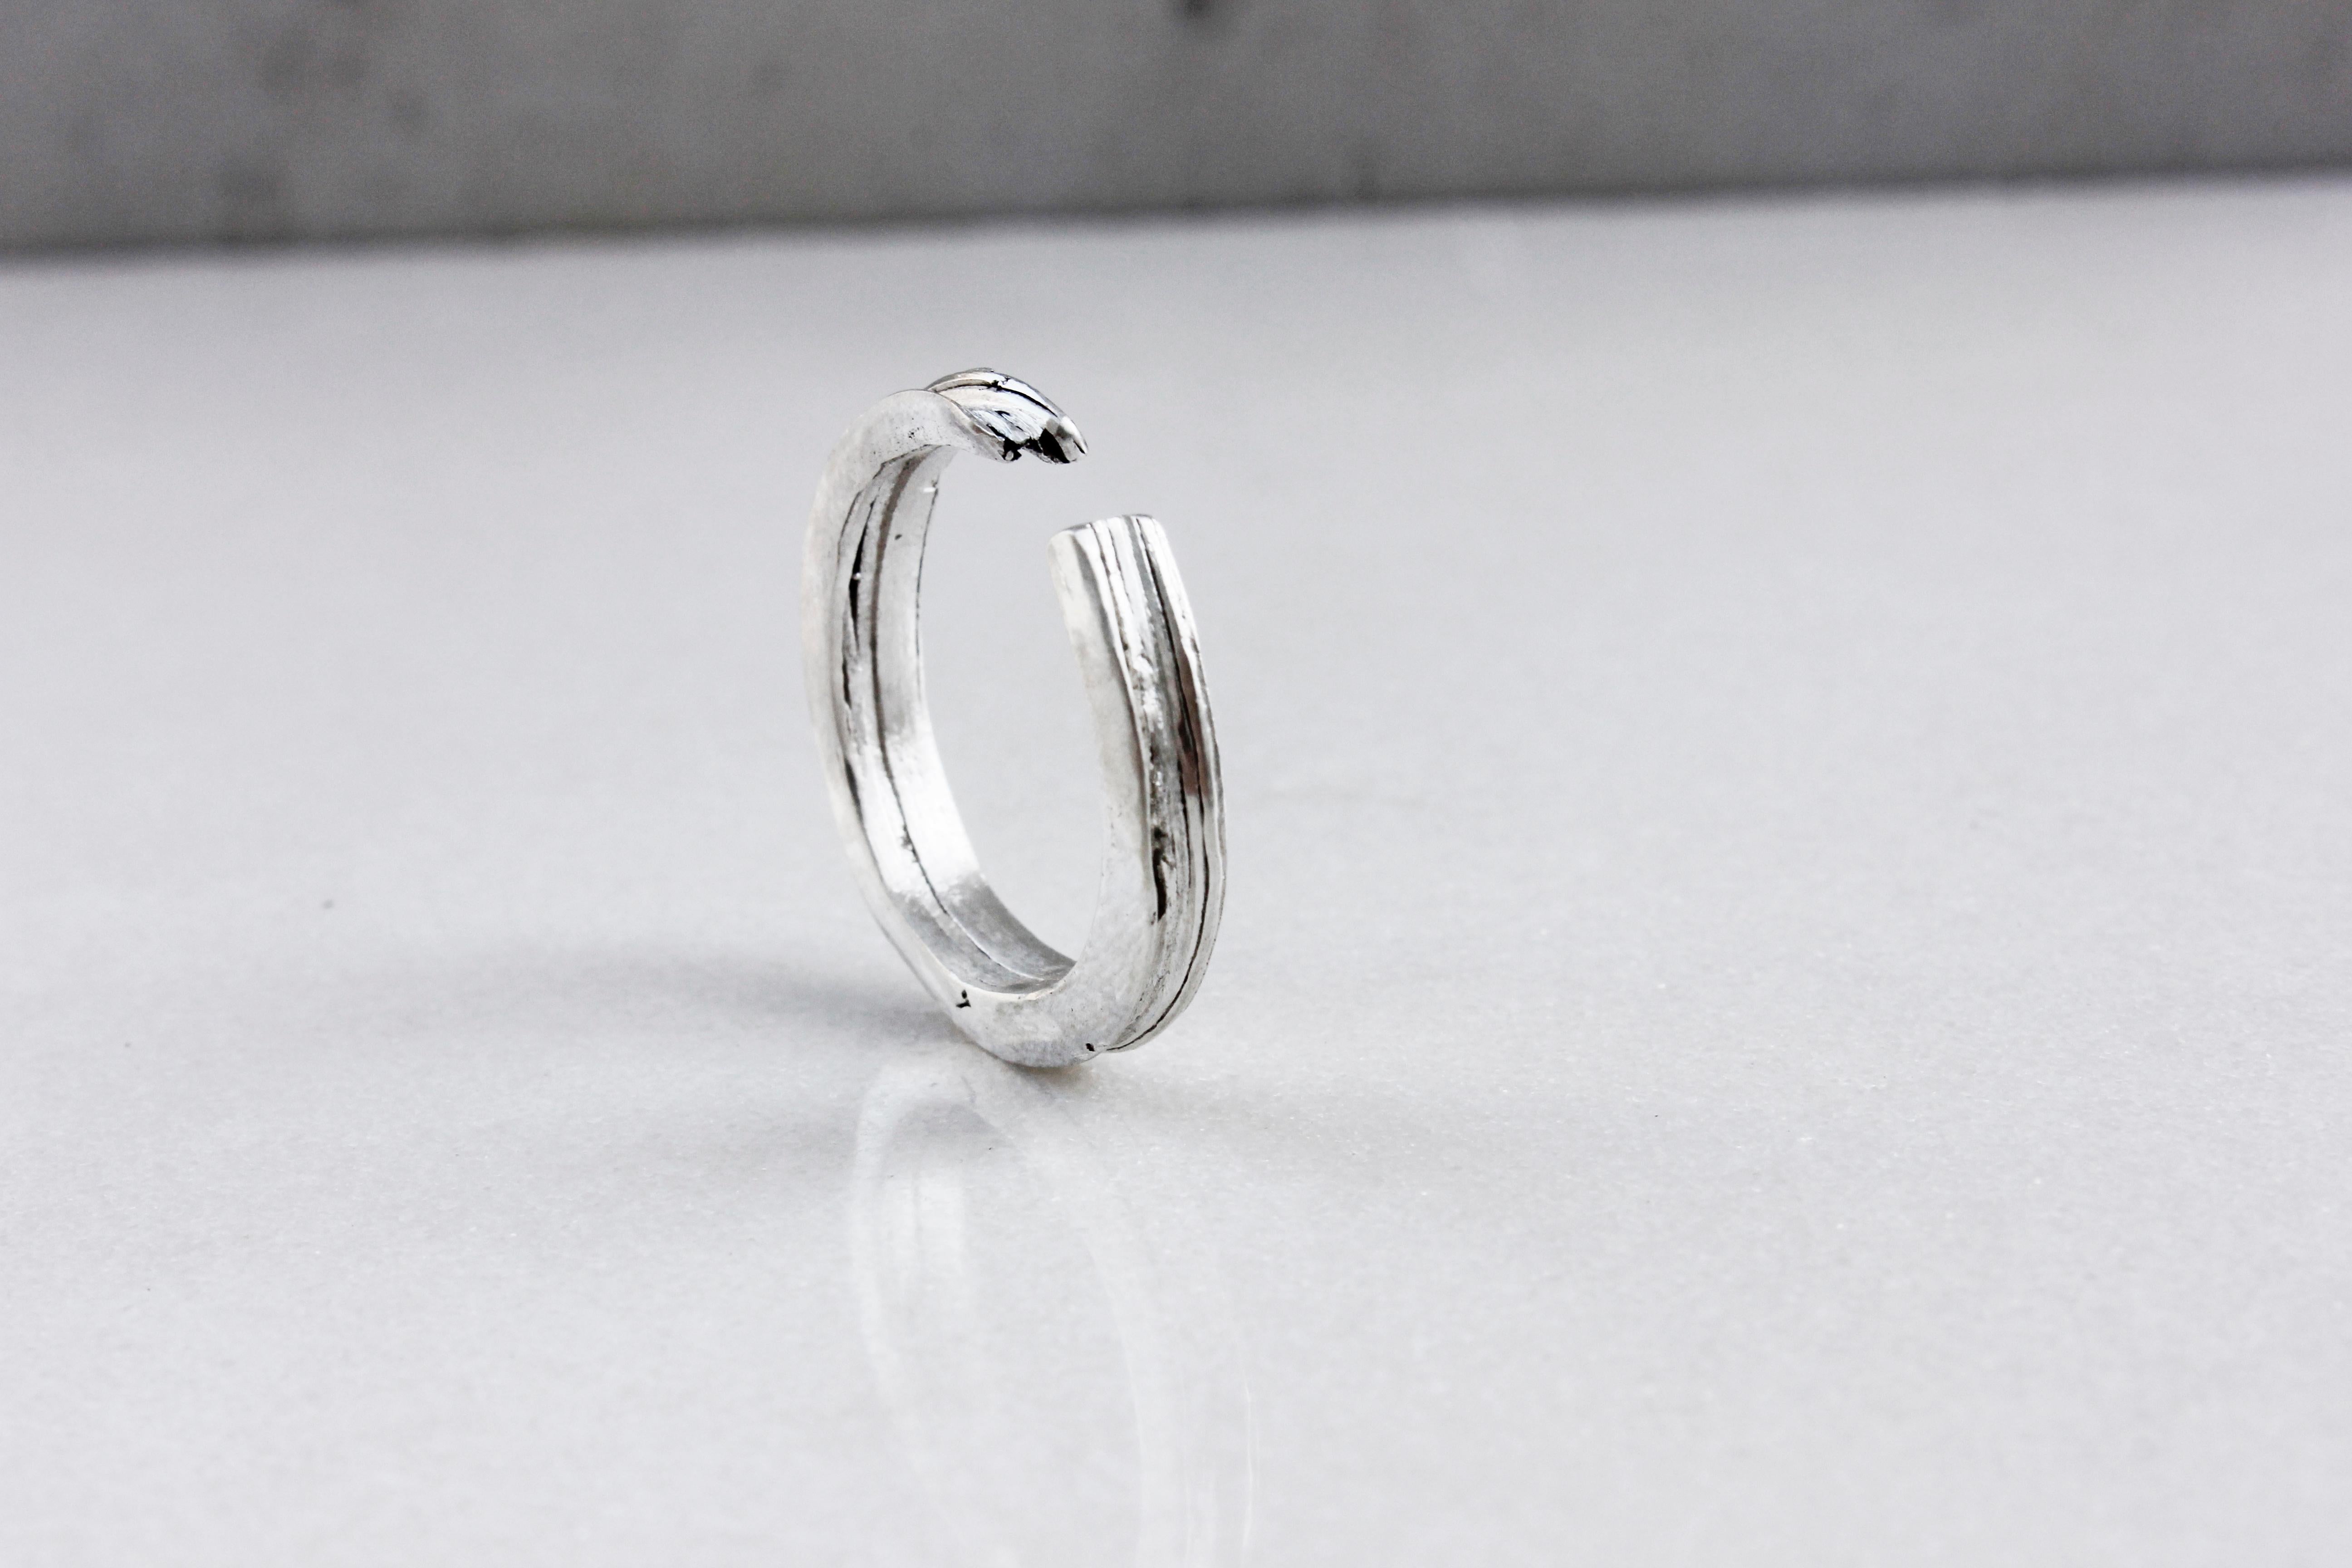 Made from eco silver sheets soldered together to create this unique texture of layers.

This adjustable open band ring is ideal if you are unsure of your size.